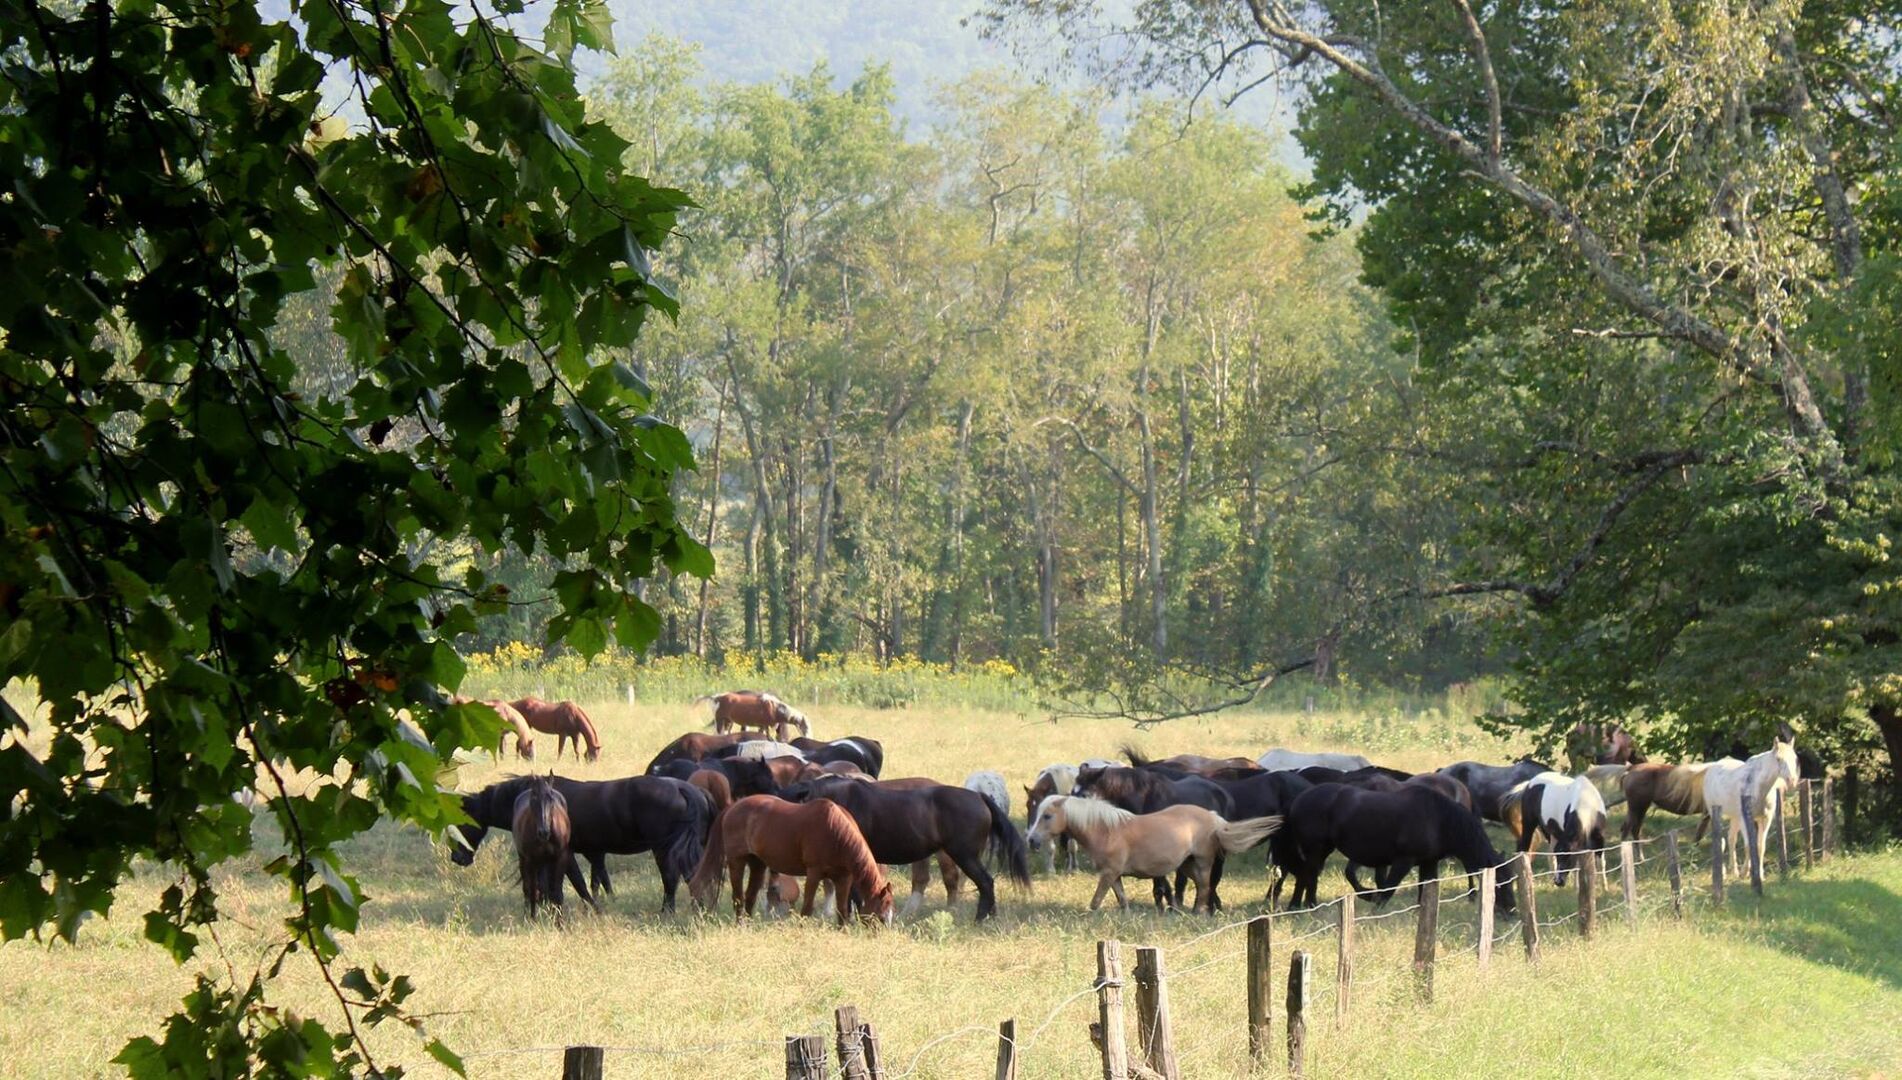 Horses roaming the valley in Cades Cove